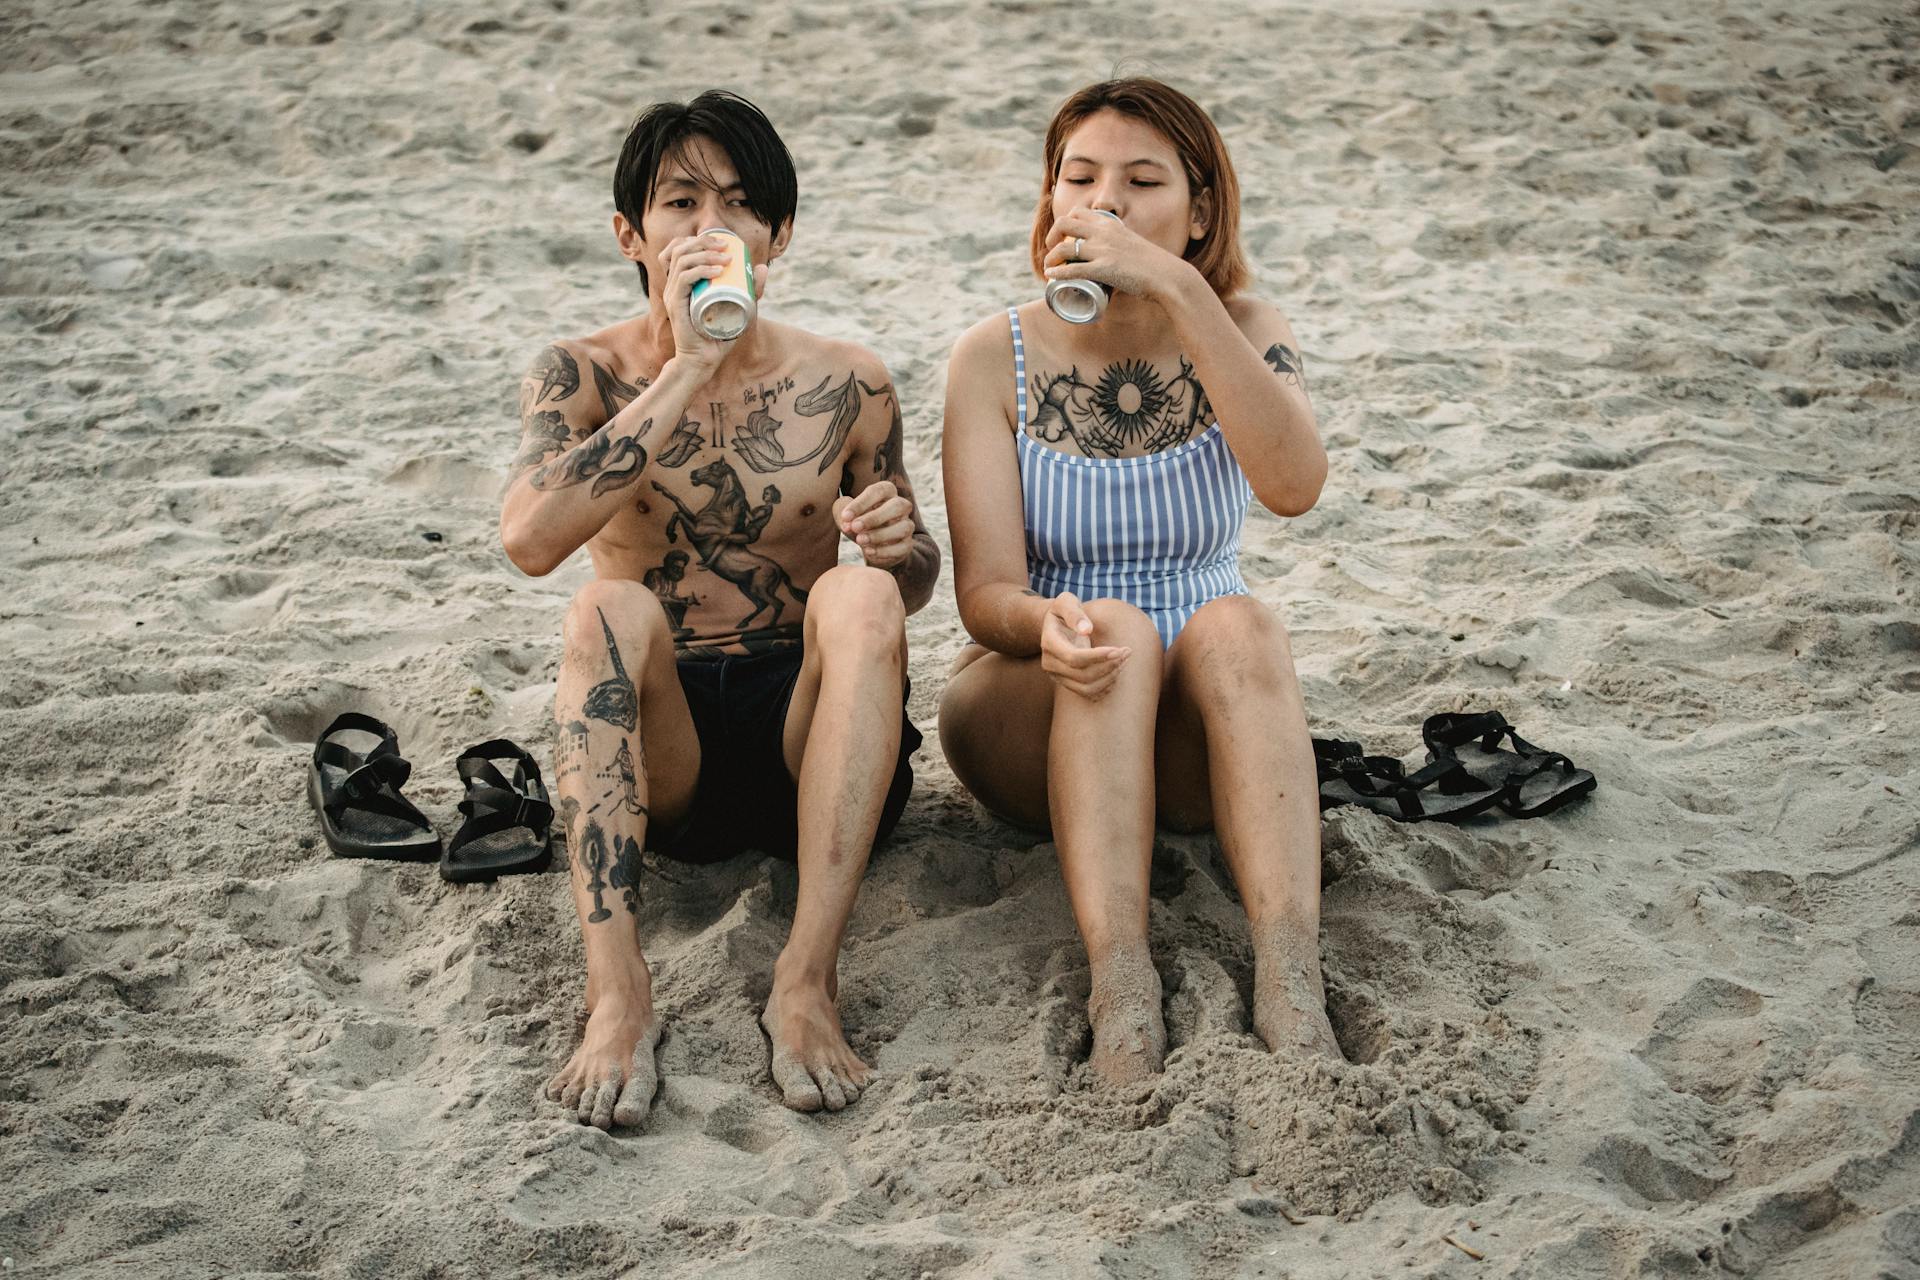 Man and Woman Sitting on the Beach Drinking Beverages from Cans